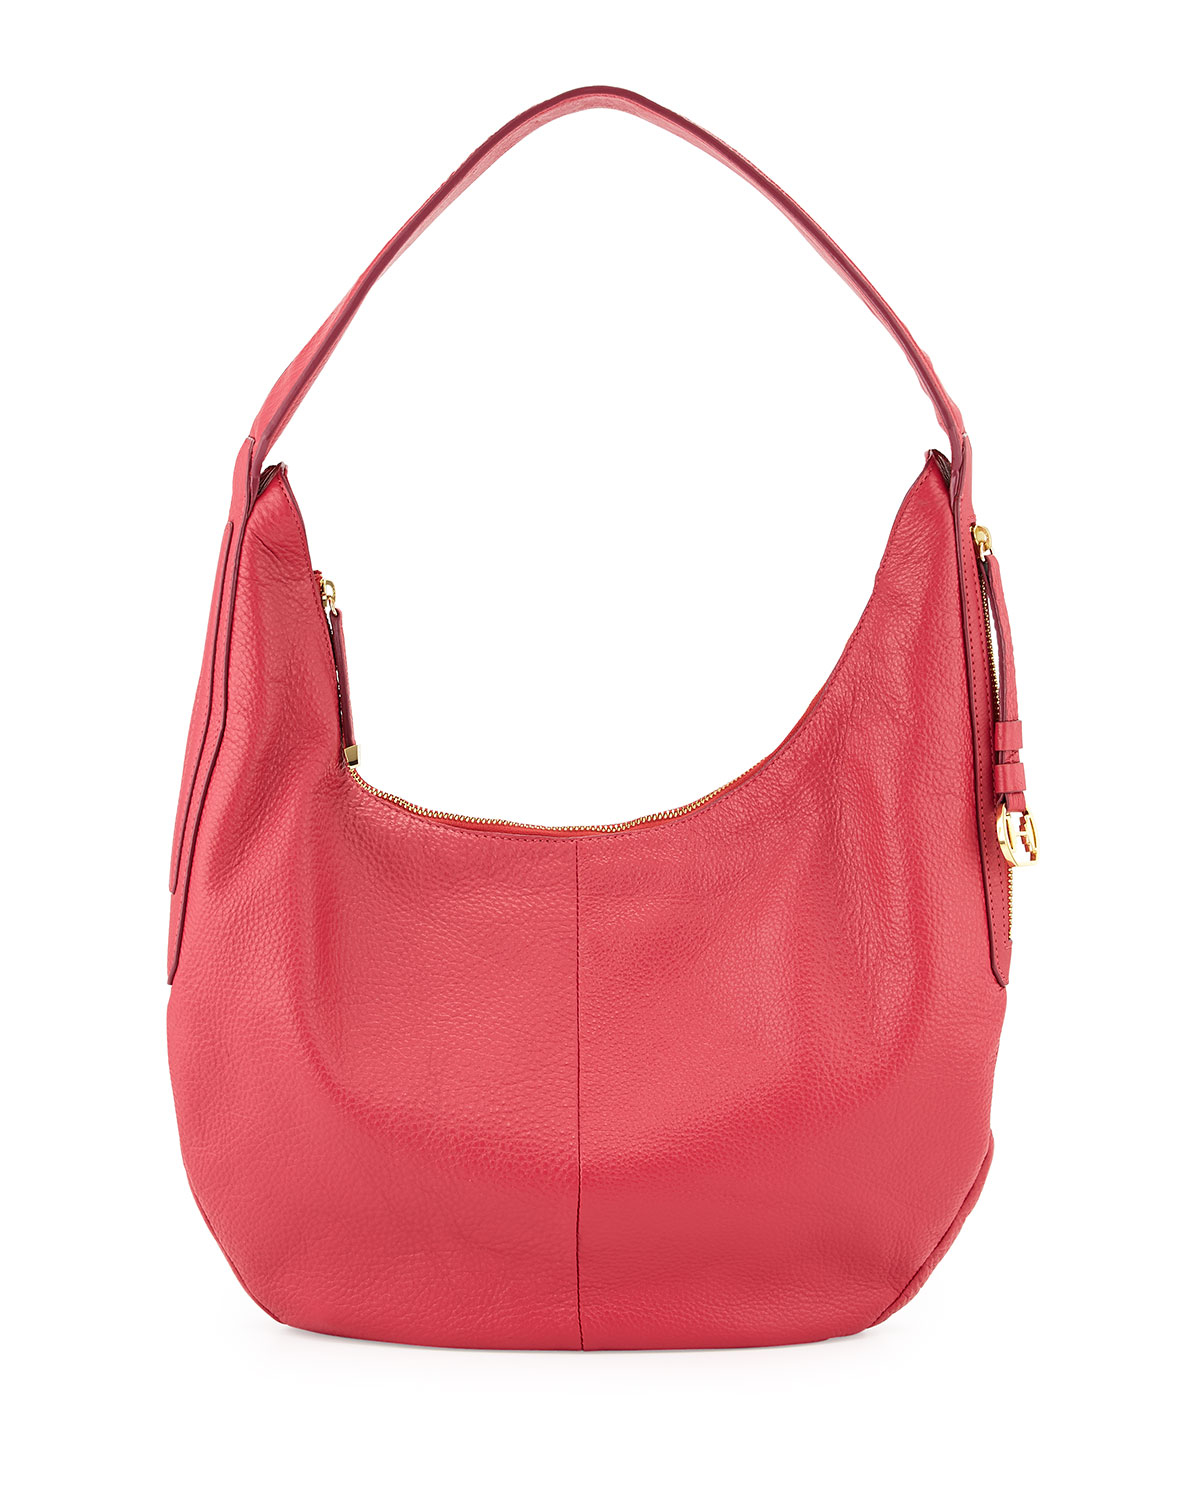 Lyst - Halston Leather Slouch Hobo Bag in Pink